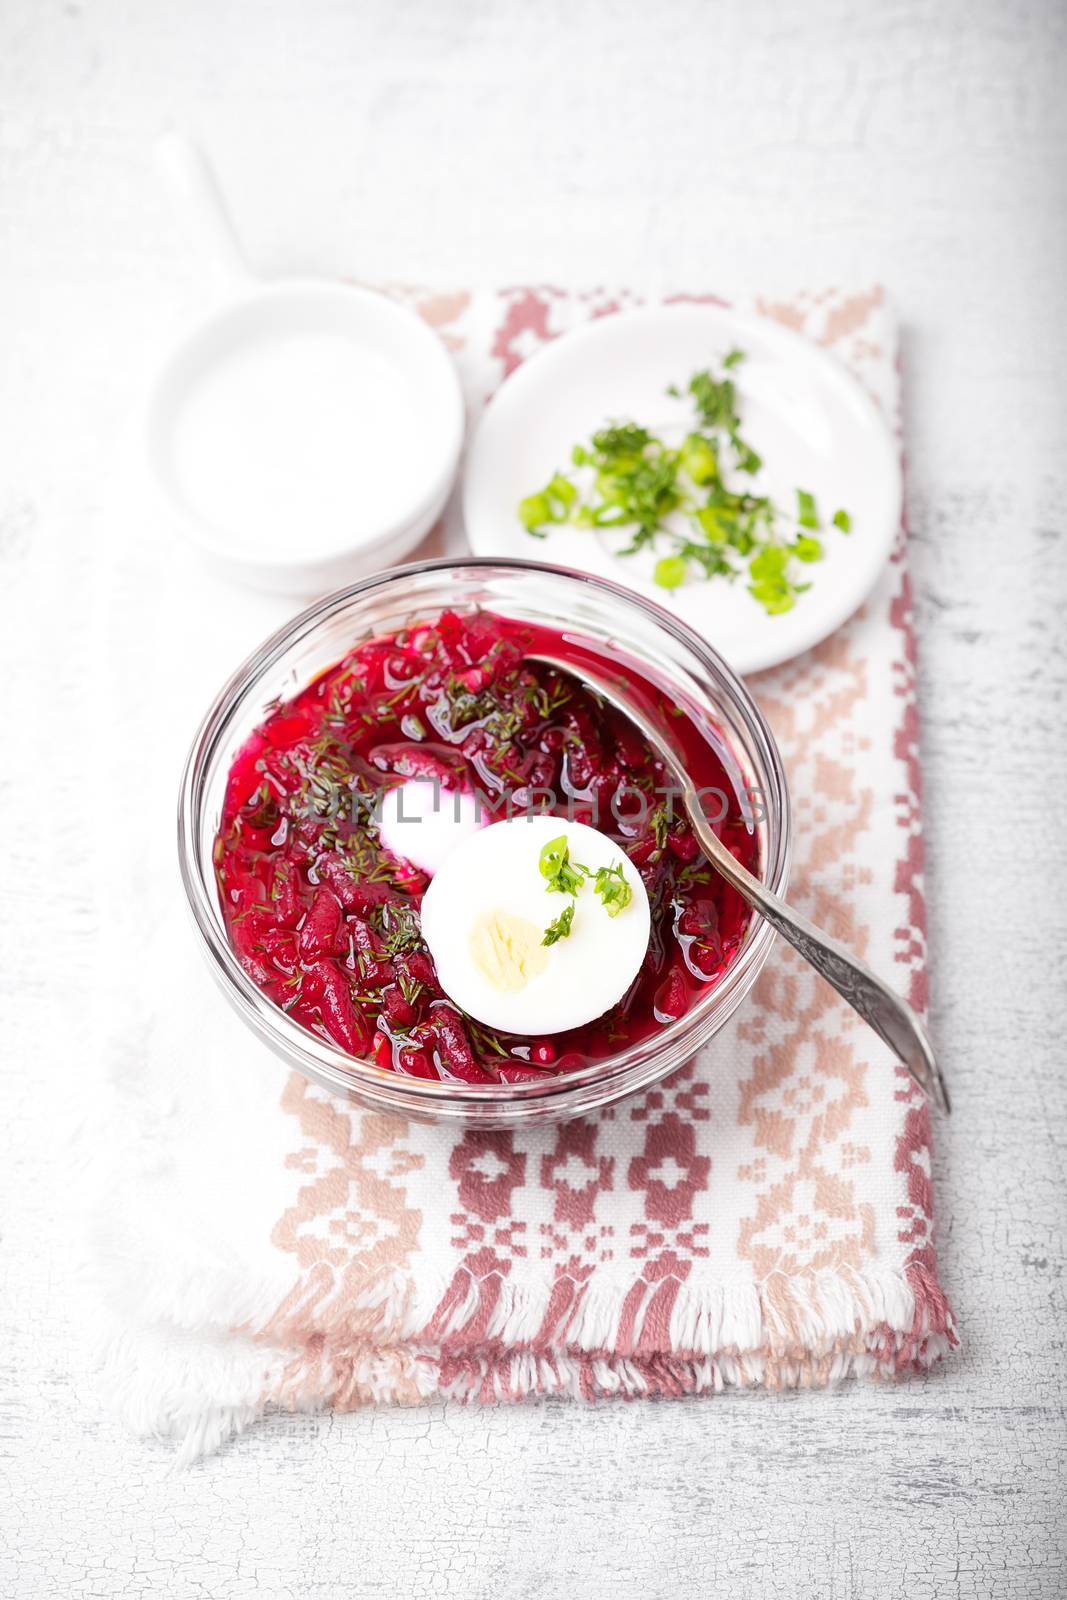 Cold beet soup by supercat67